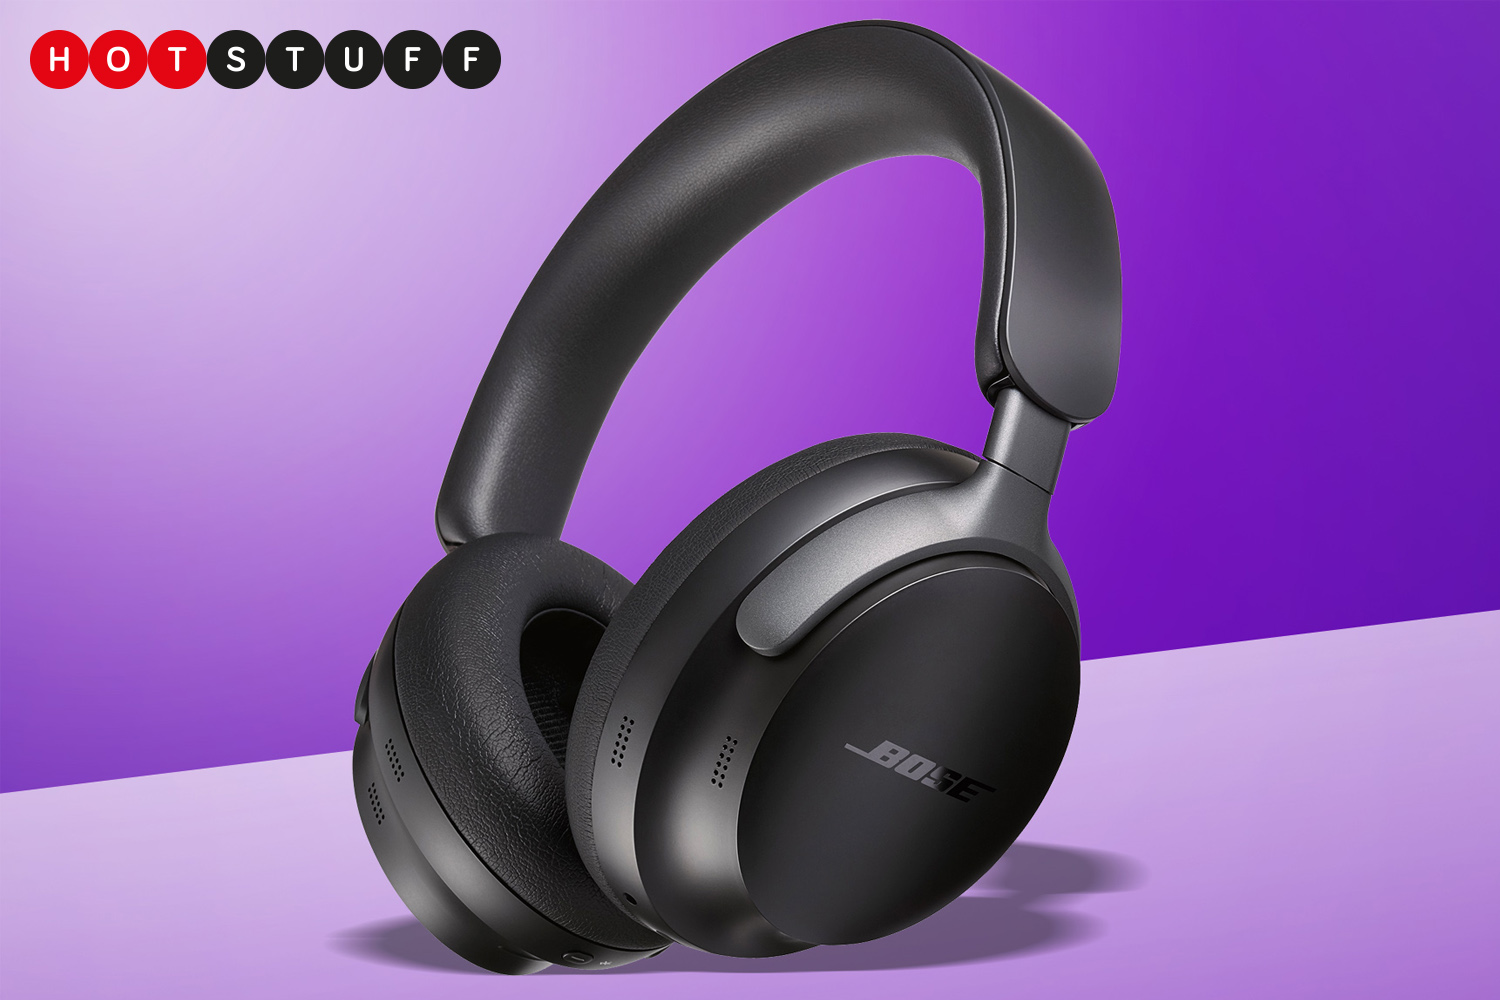  NEW Bose QuietComfort Ultra Wireless Noise Cancelling  Headphones with Spatial Audio, Over-the-Ear Headphones with Mic, Up to 24  Hours of Battery Life, Black : Electronics